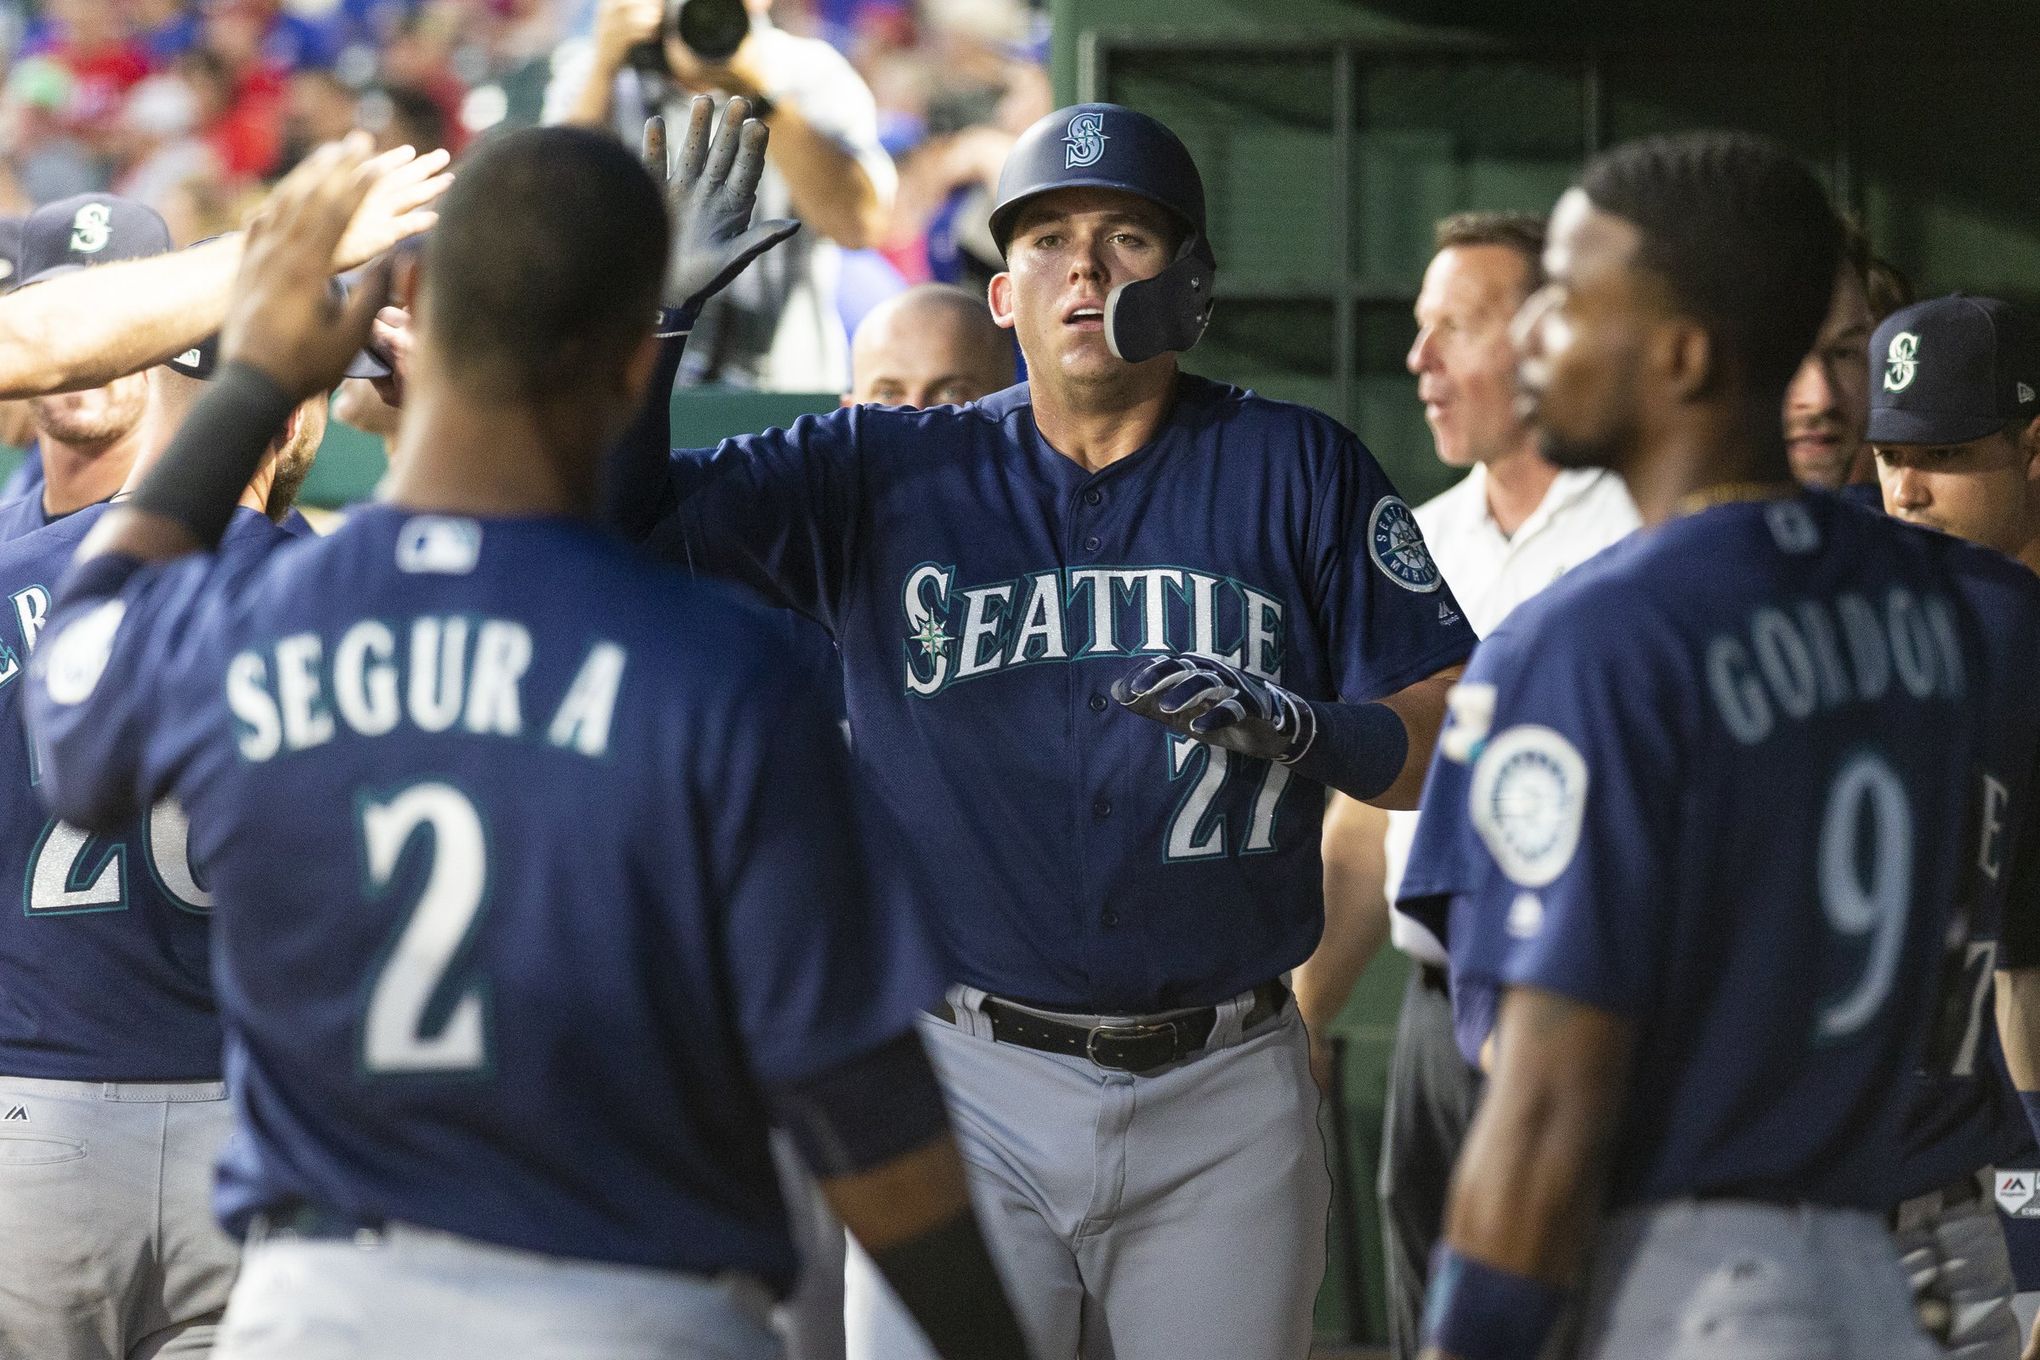 Mariners improve to 9-1 in extra innings, beating Texas 4-3 on a Ryon Healy hit | Times